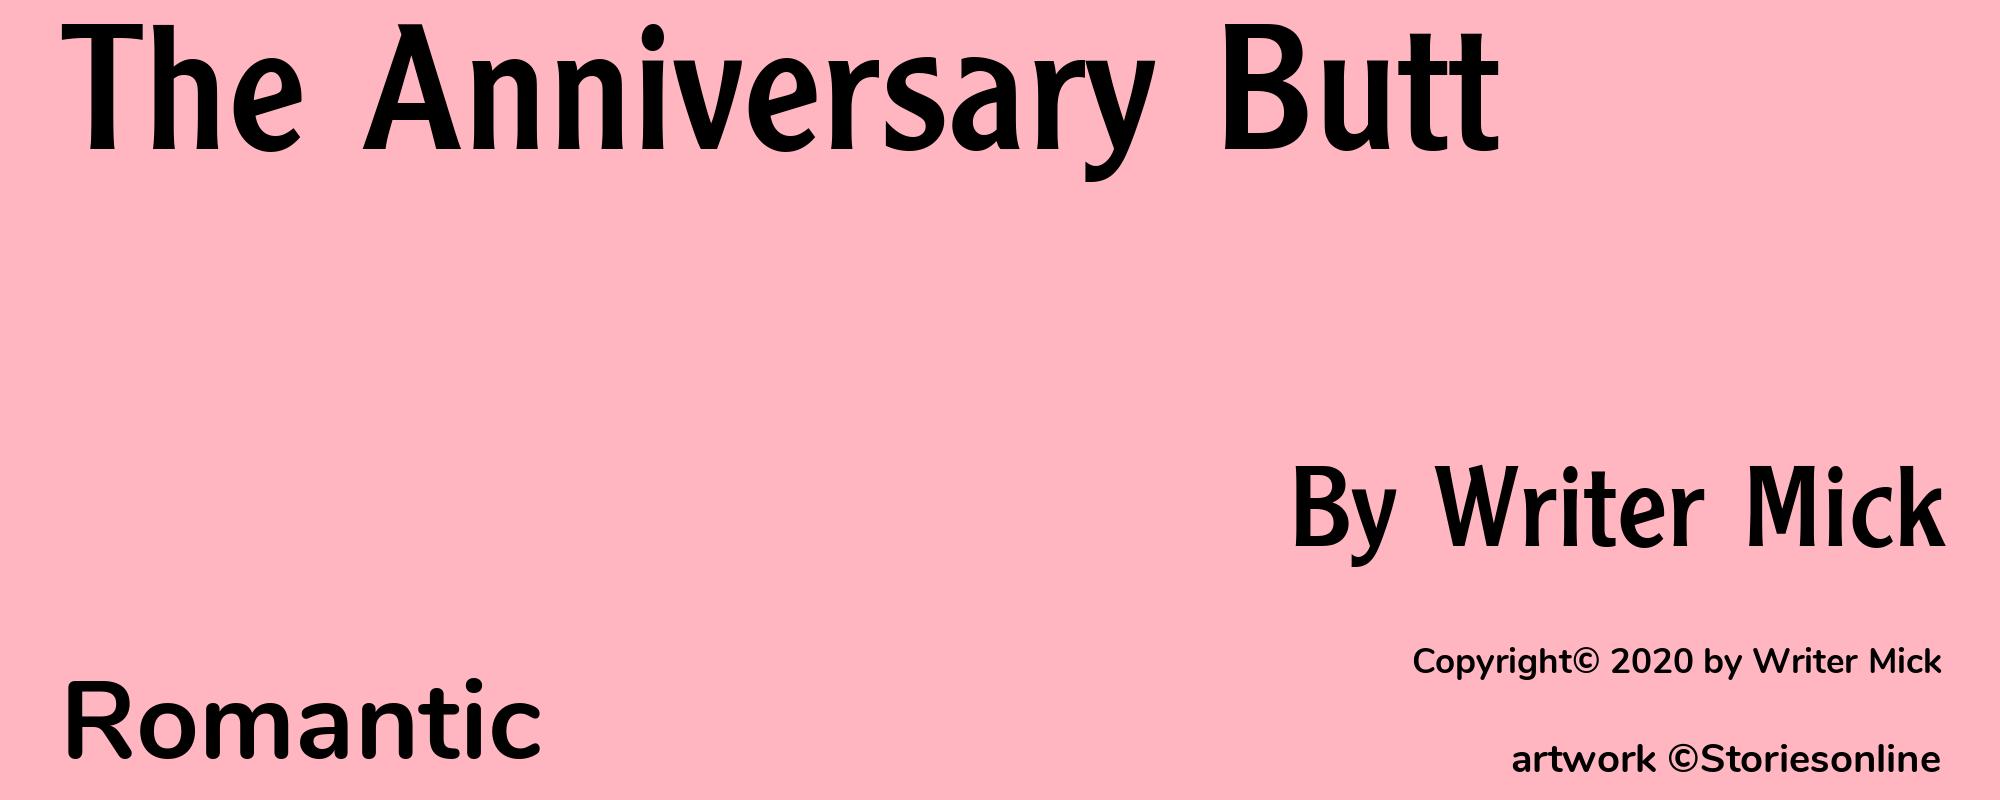 The Anniversary Butt - Cover